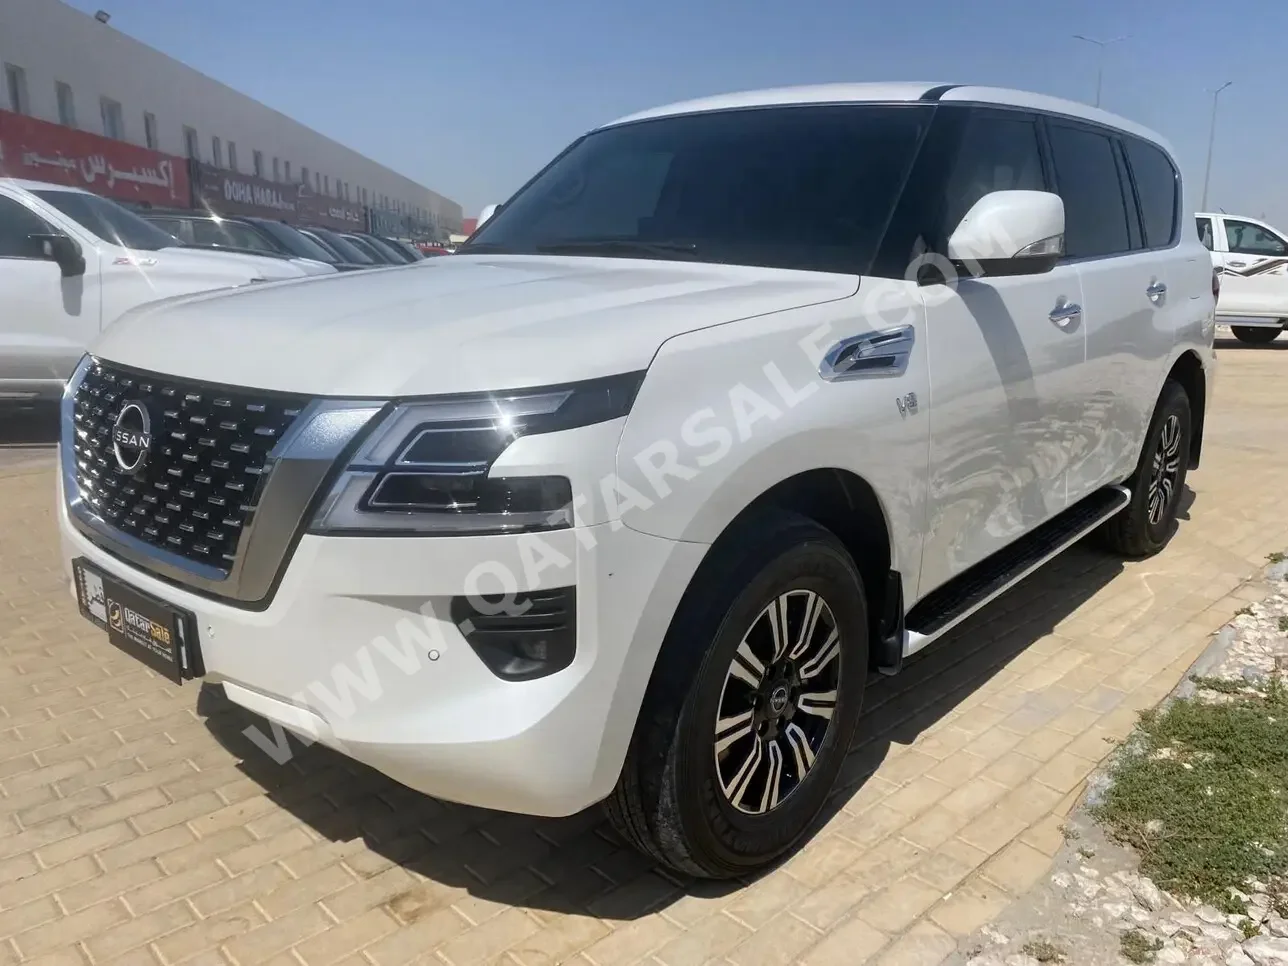 Nissan  Patrol  LE  2023  Automatic  38,000 Km  8 Cylinder  Four Wheel Drive (4WD)  SUV  White  With Warranty